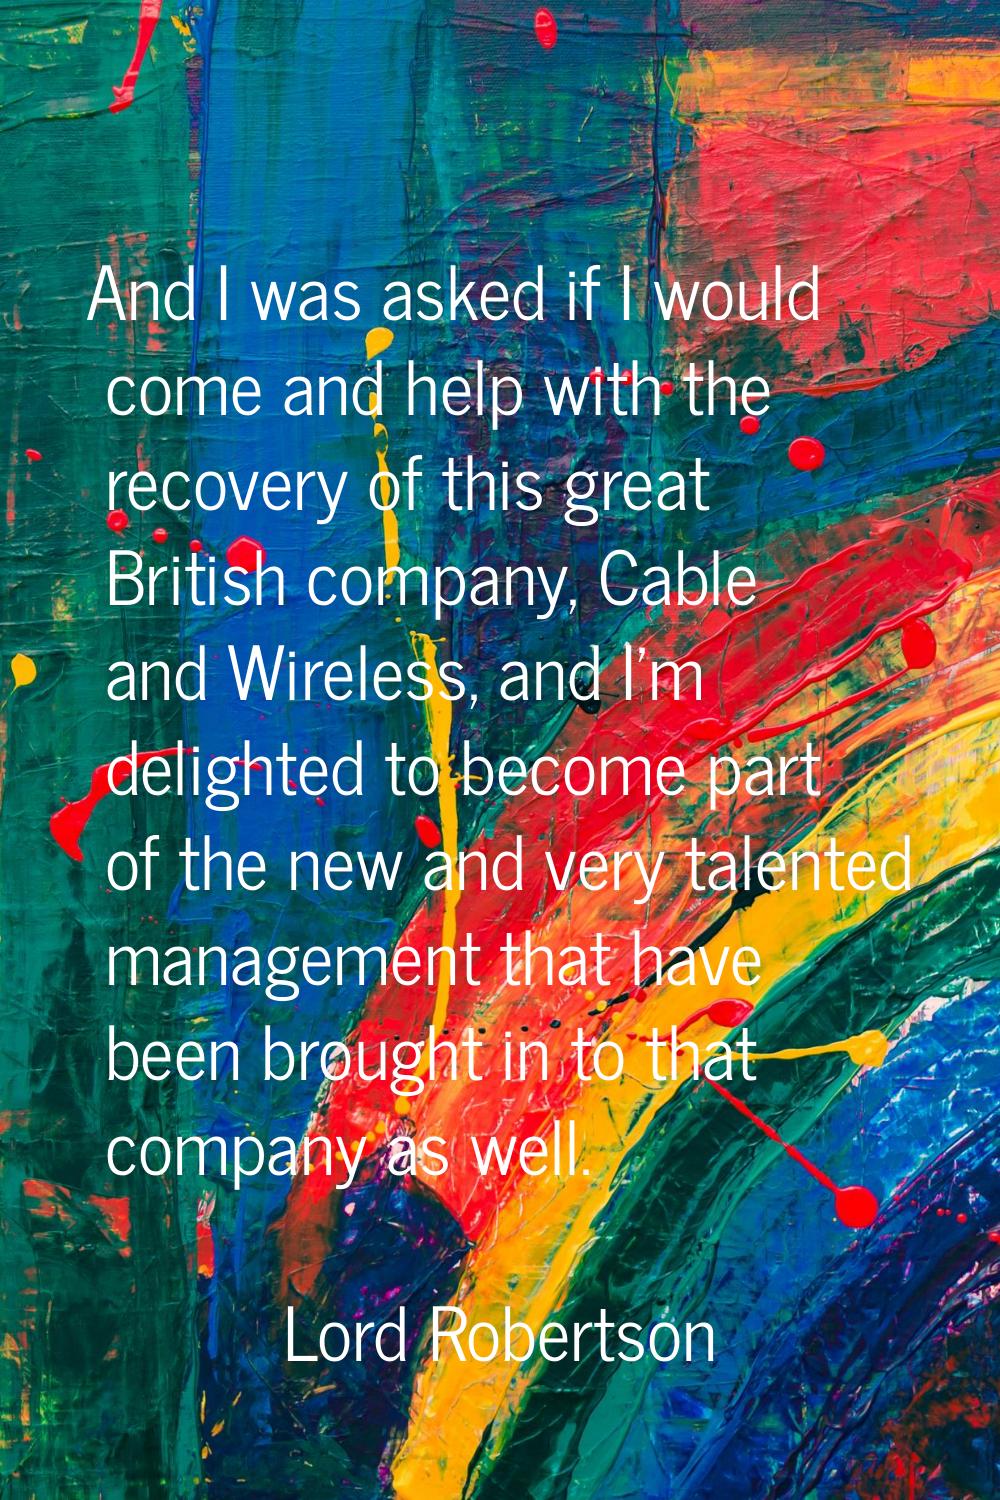 And I was asked if I would come and help with the recovery of this great British company, Cable and